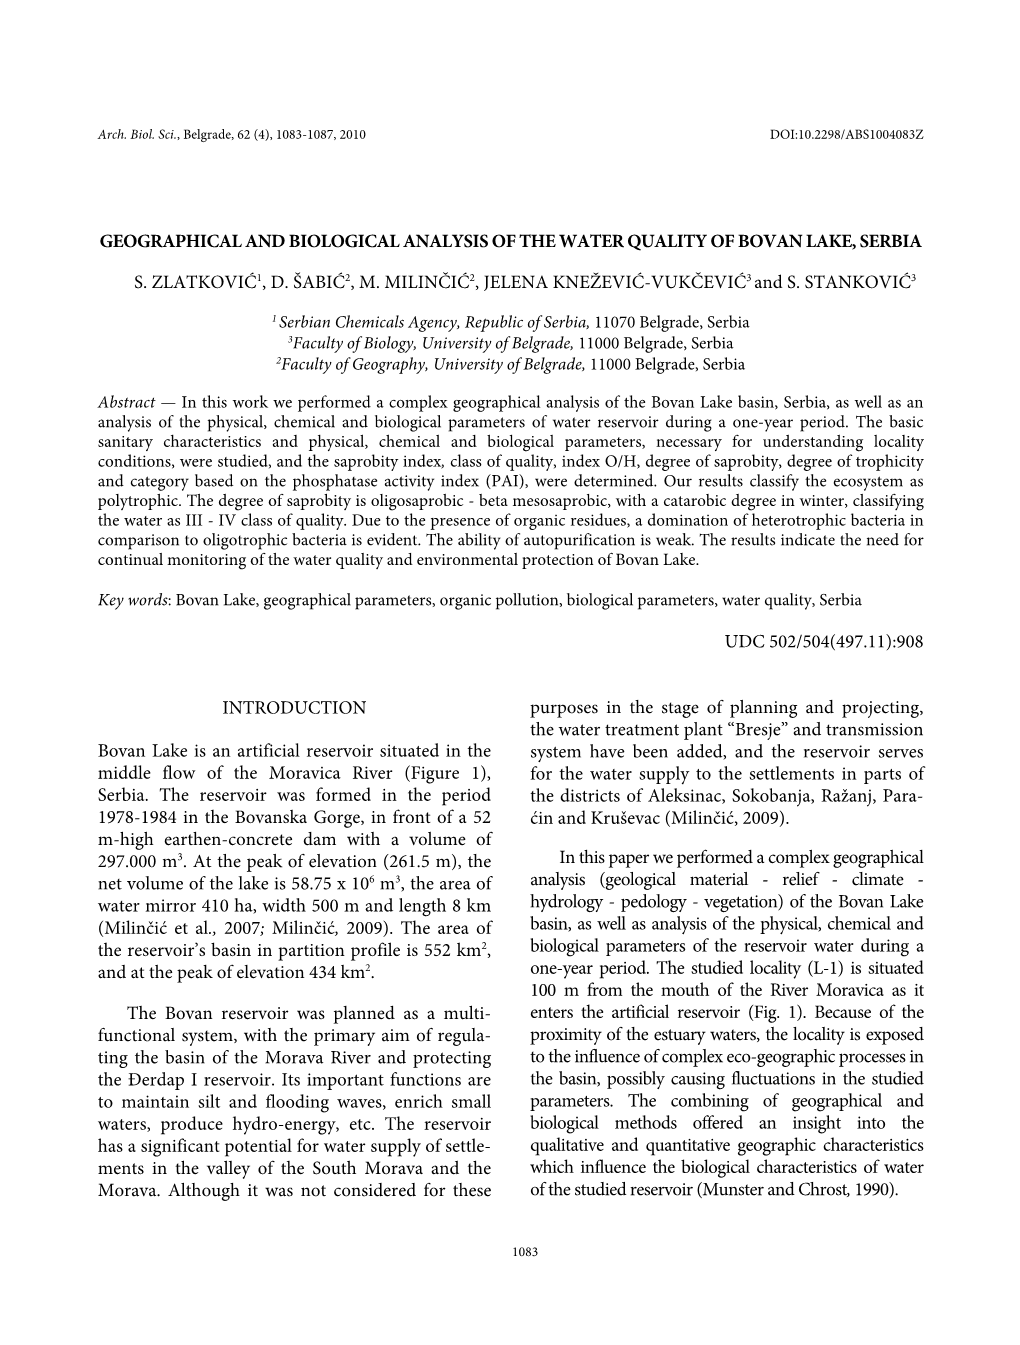 Geographical and Biological Analysis of the Water Quality of Bovan Lake, Serbia